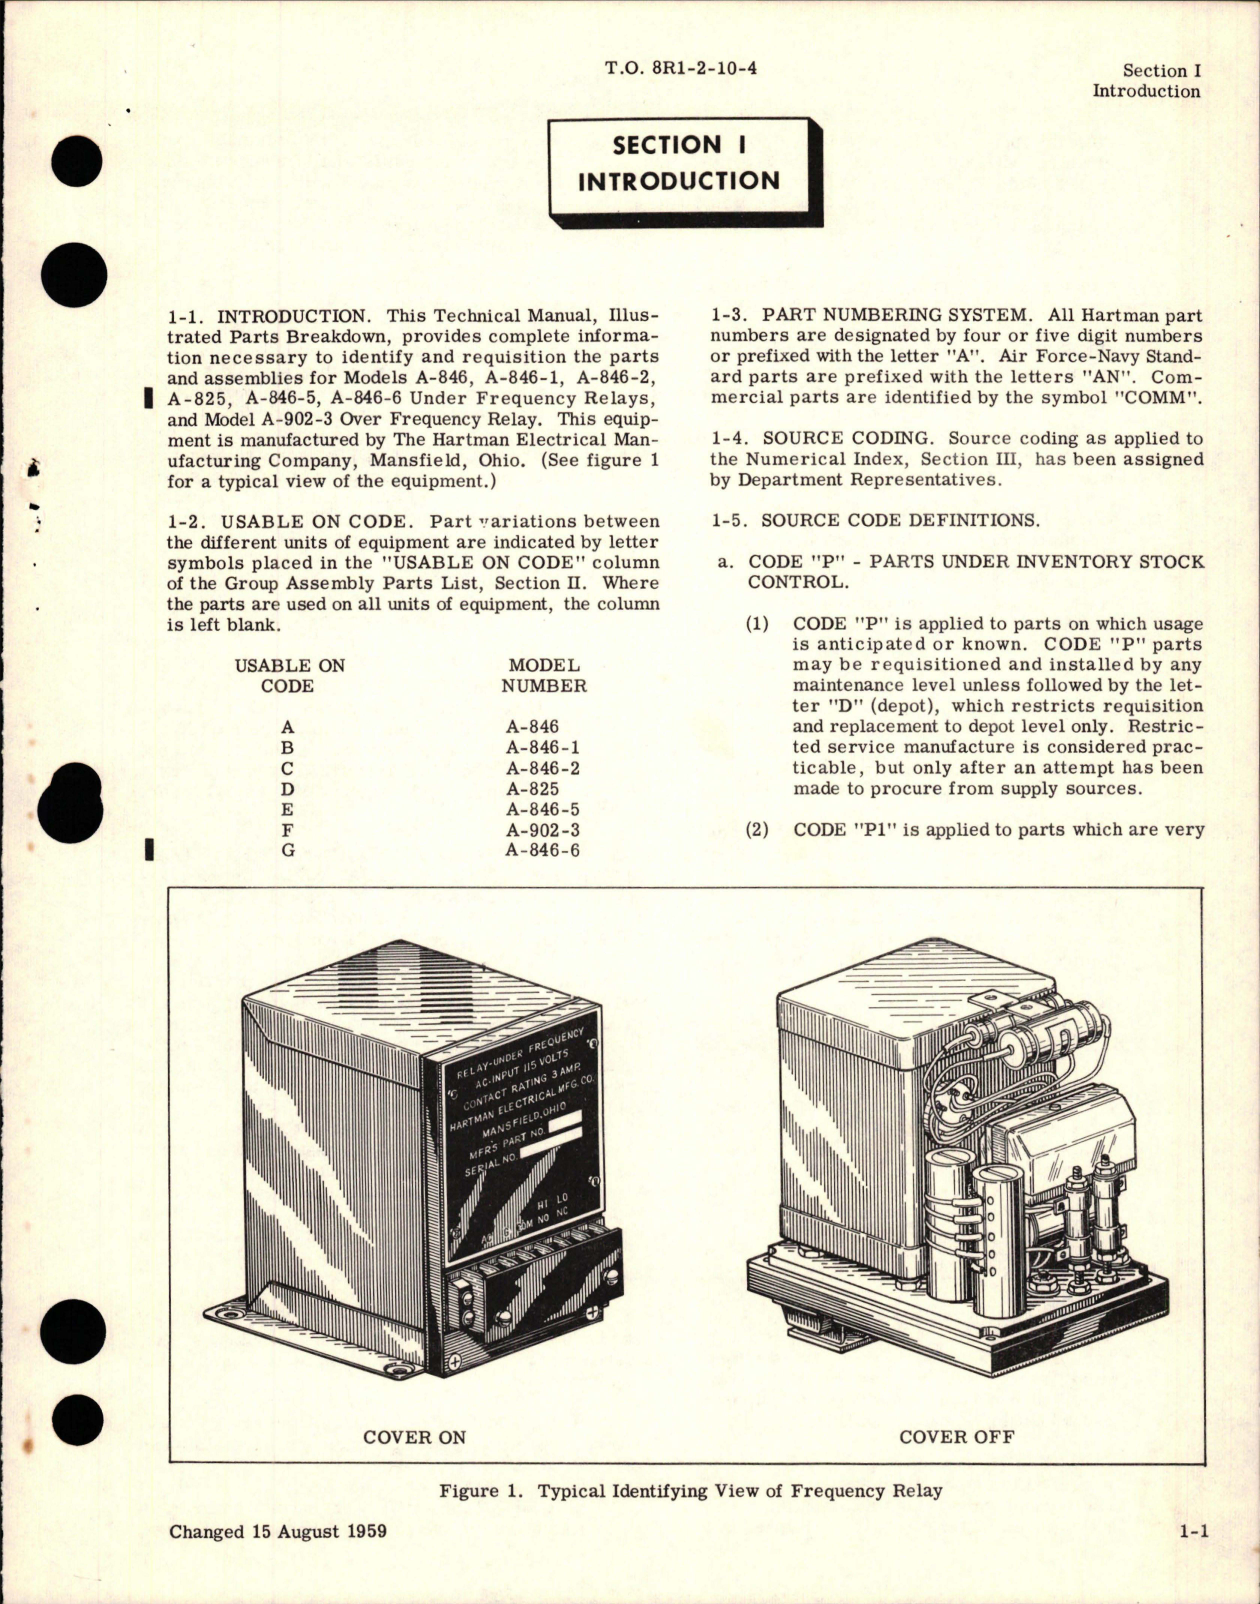 Sample page 5 from AirCorps Library document: Illustrated Parts Breakdown for Frequency Relay 